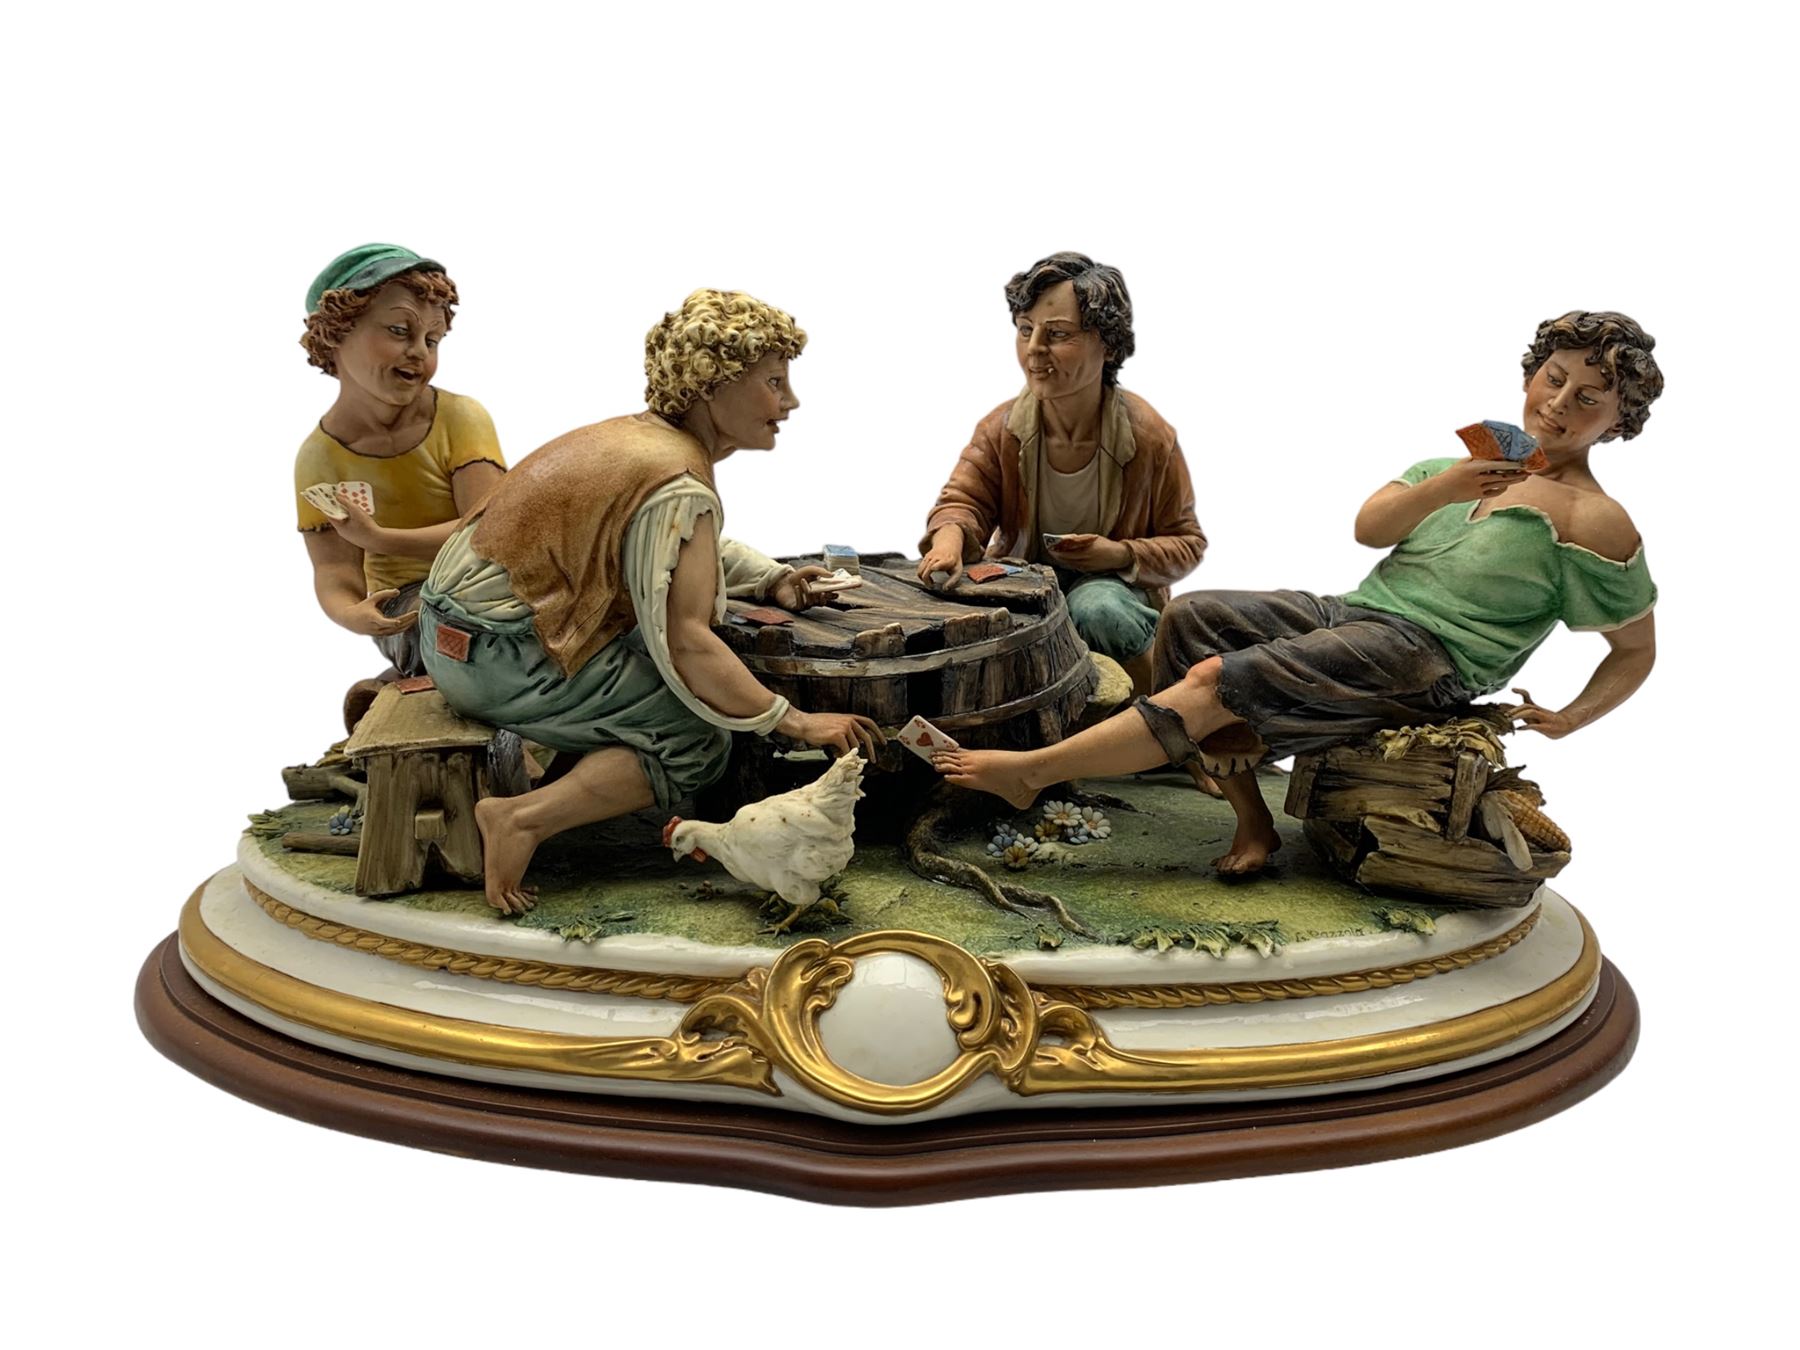 Large Capodimonte group 'The Card Players' by Luciano Cazzola - Image 2 of 2